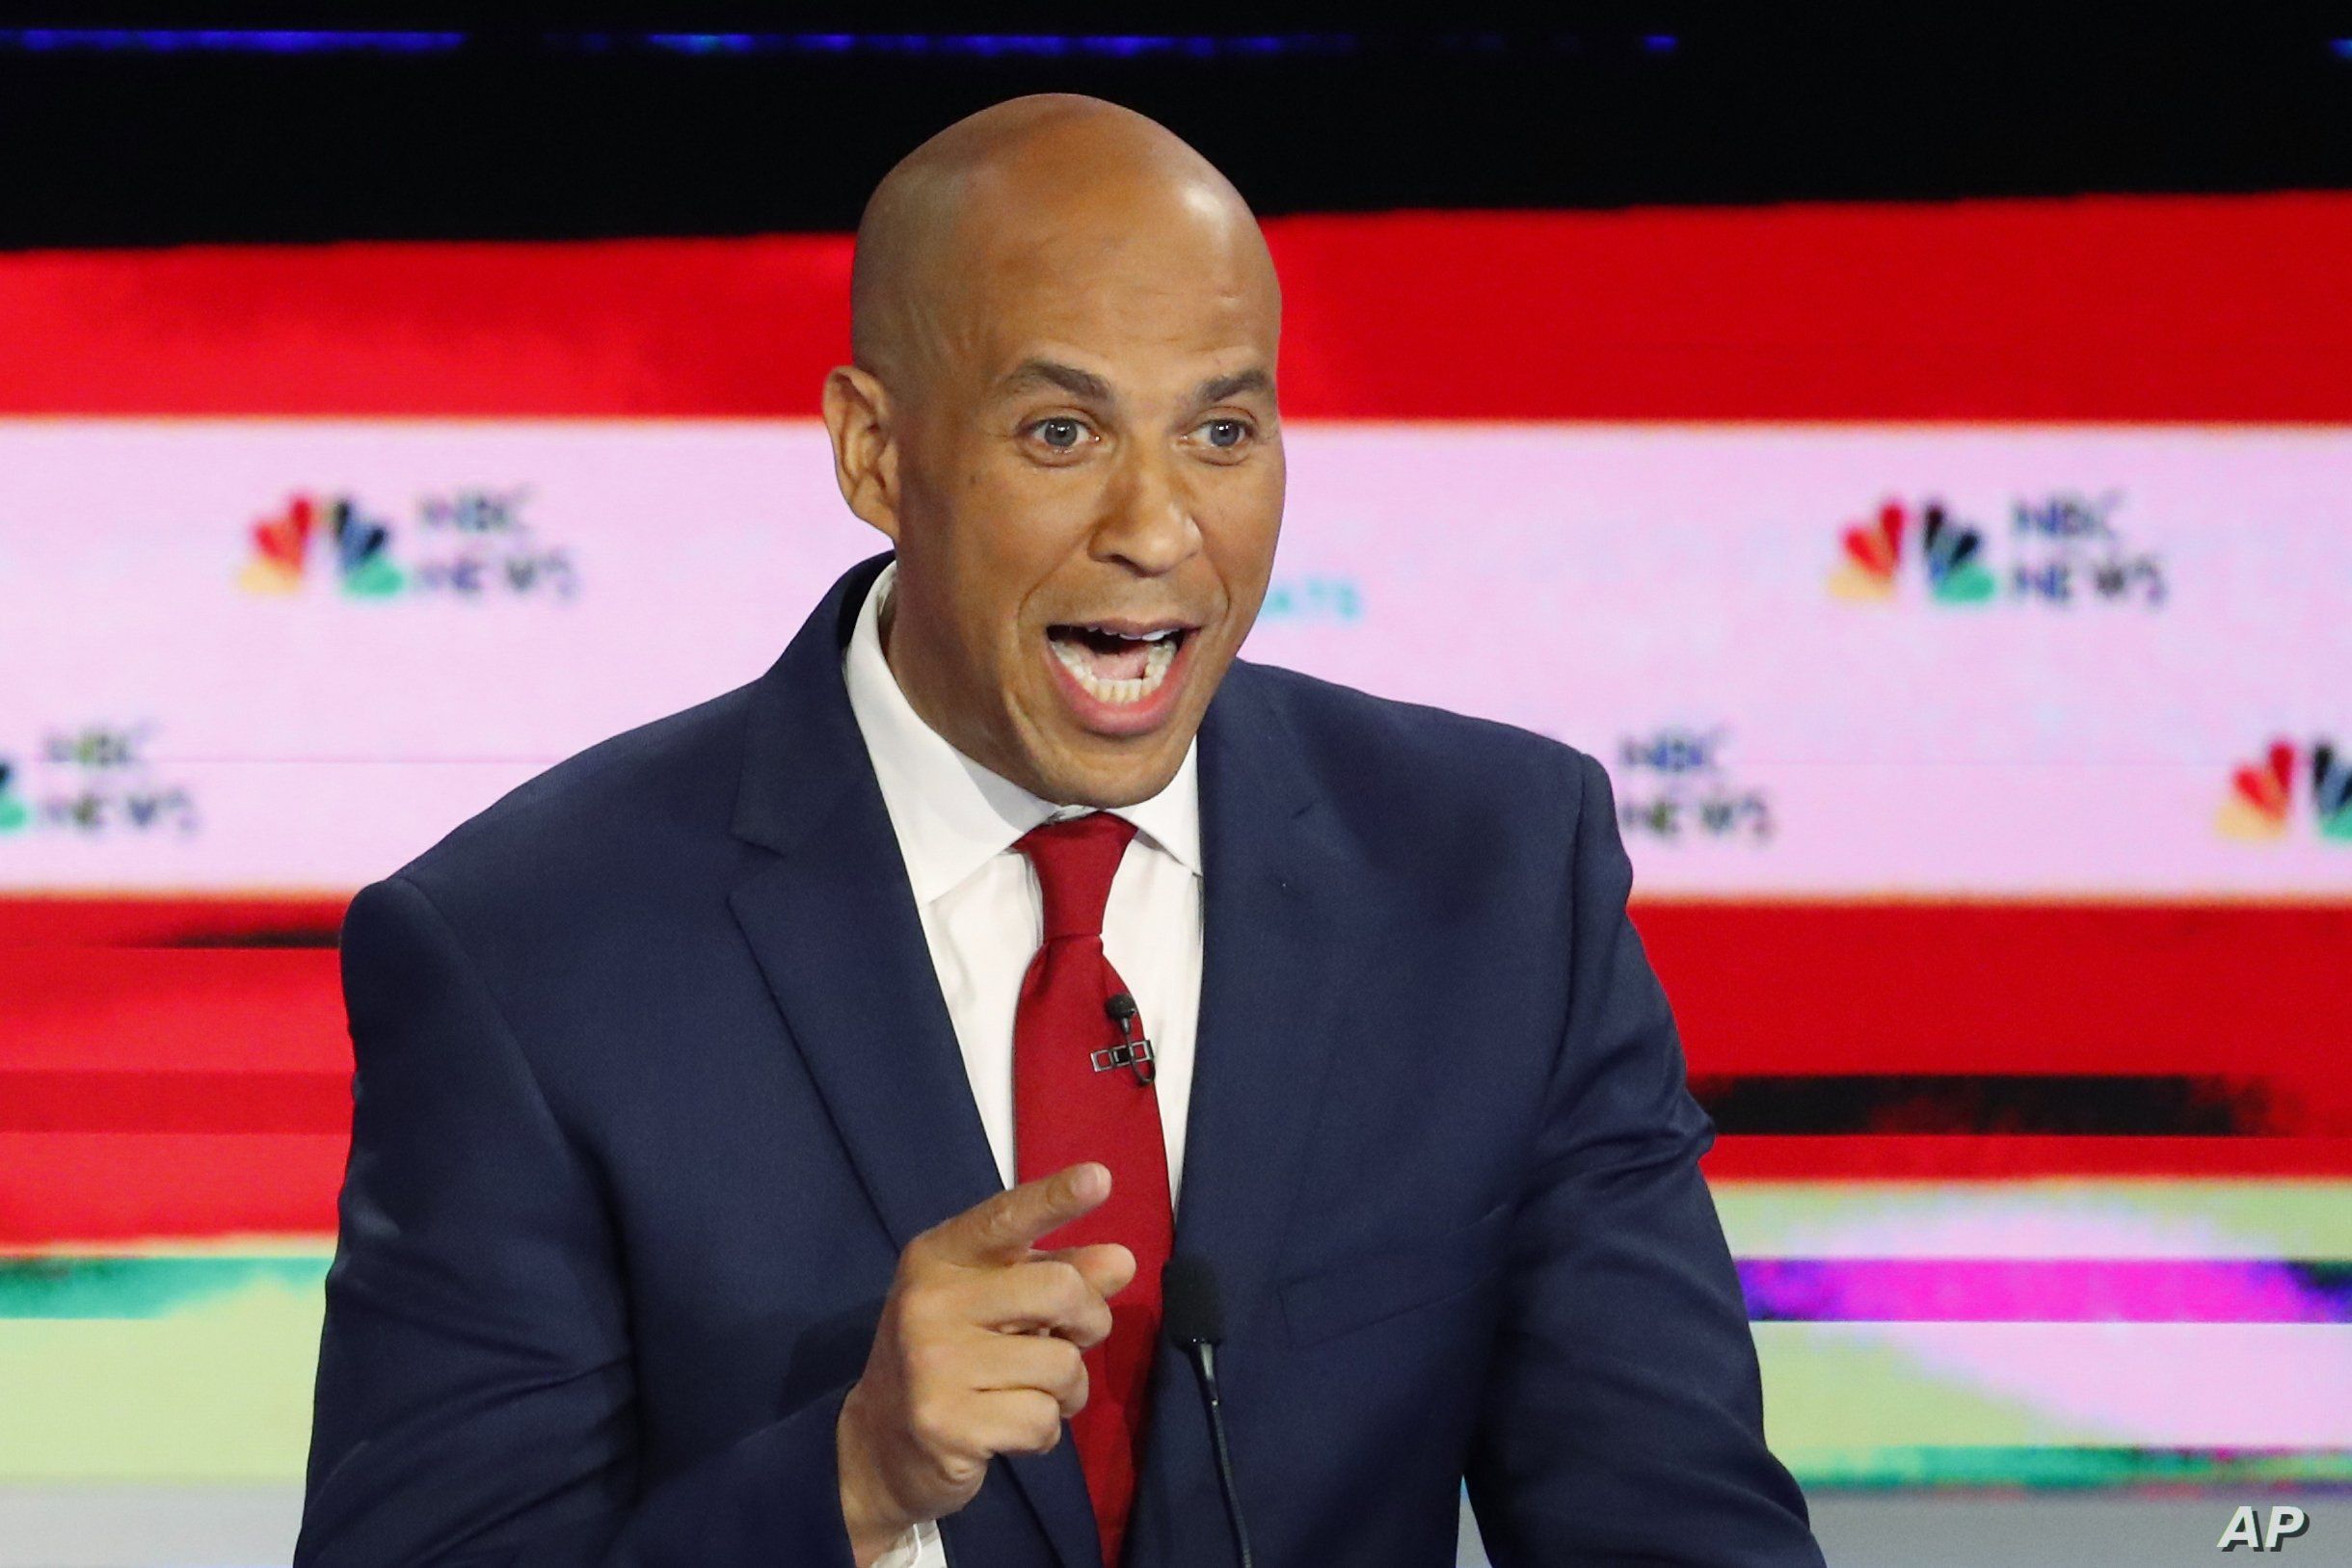 In this June 26, 2019 photo, Democratic presidential candidate Sen. Cory Booker, D-N.J., speaks during a Democratic primary debate hosted by NBC News at the Adrienne Arsht Center for the Performing Art, in Miami.  (AP Photo/Wilfredo Lee)